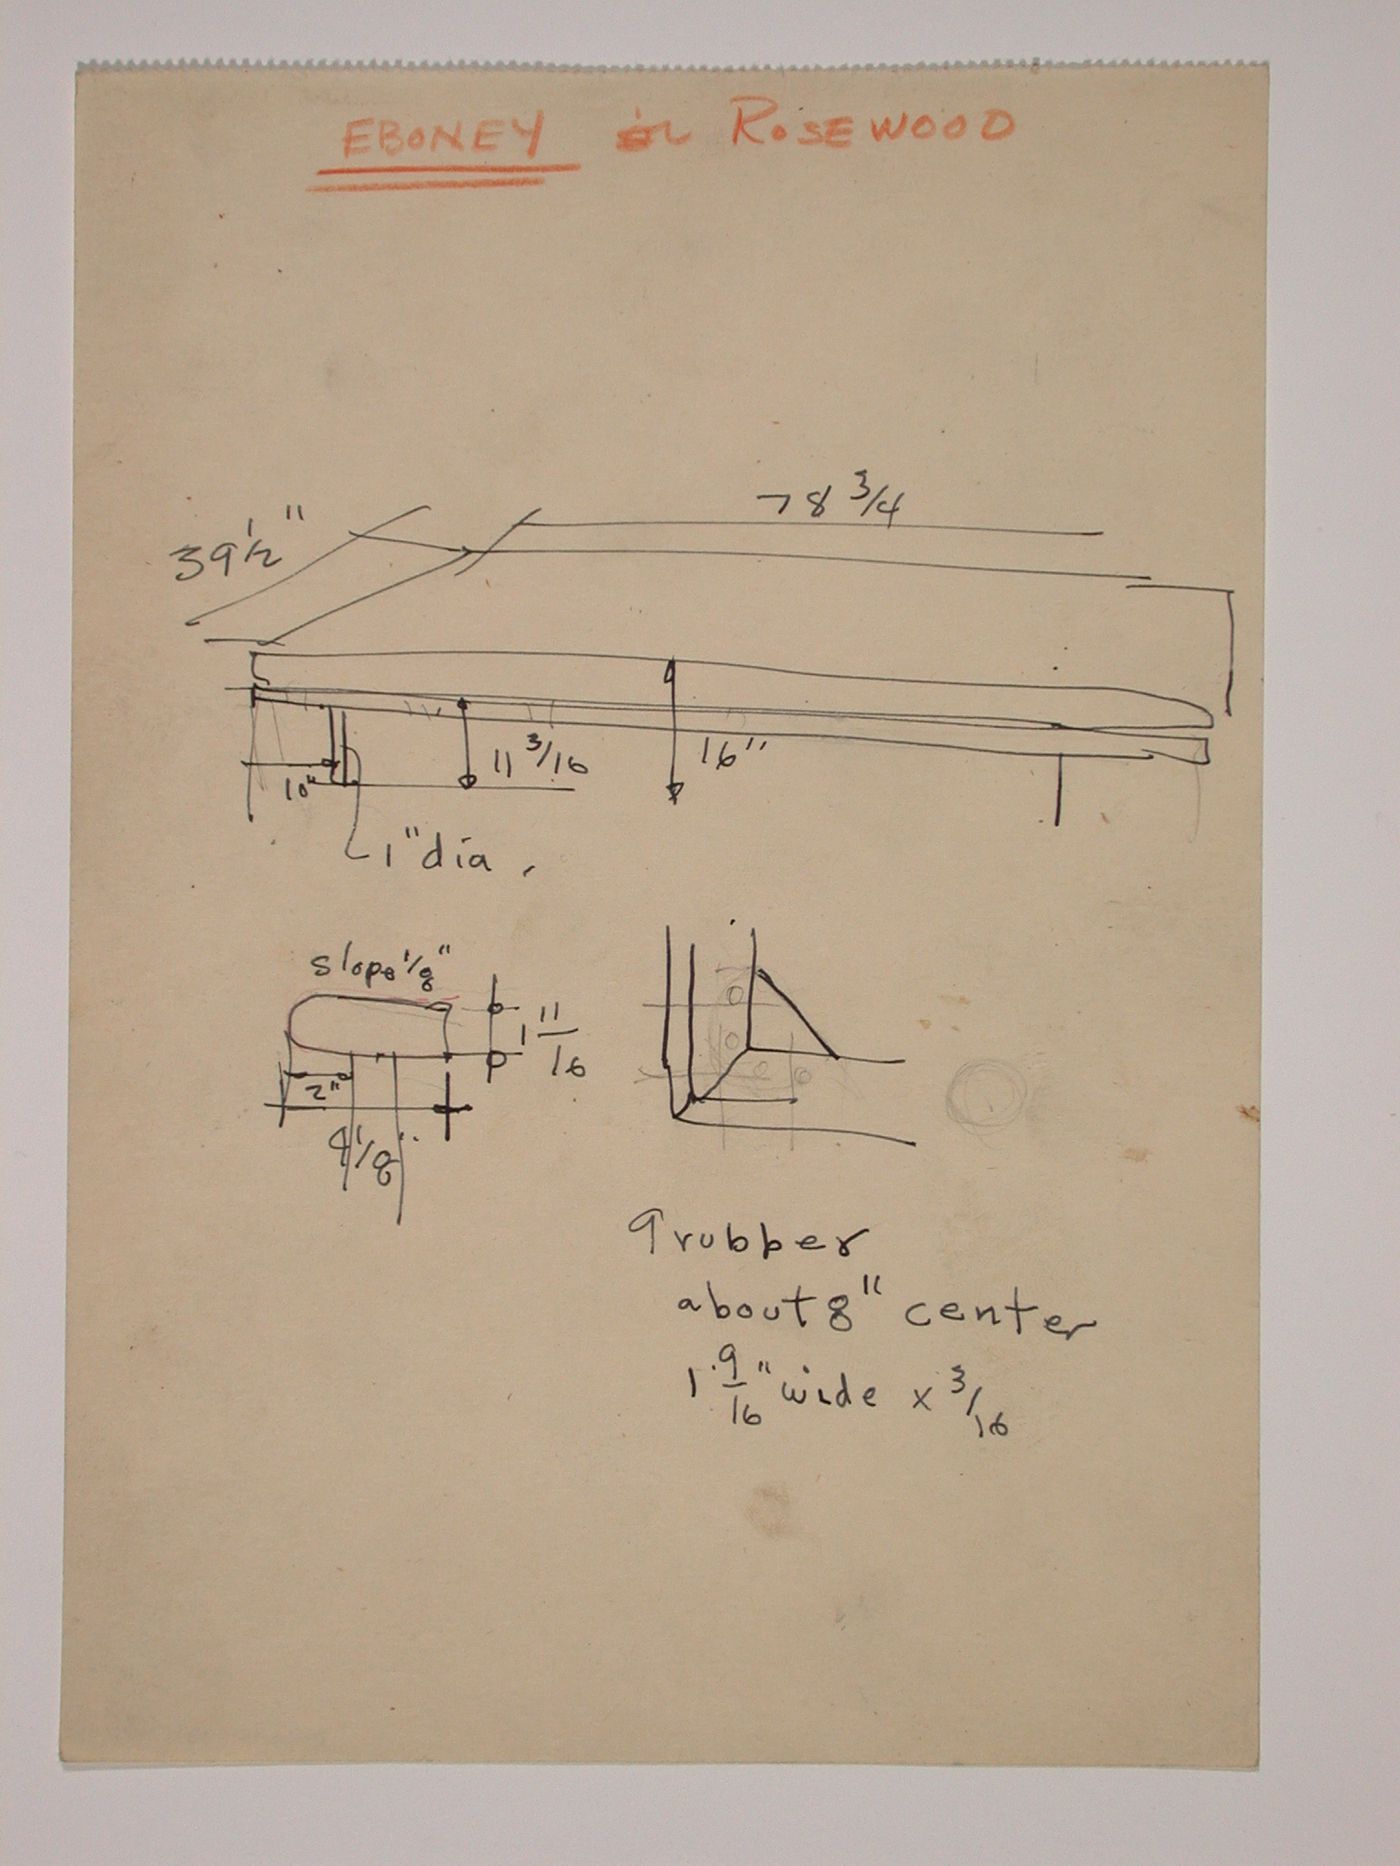 Various documents and drawings including furniture design and office renovation: File G 703